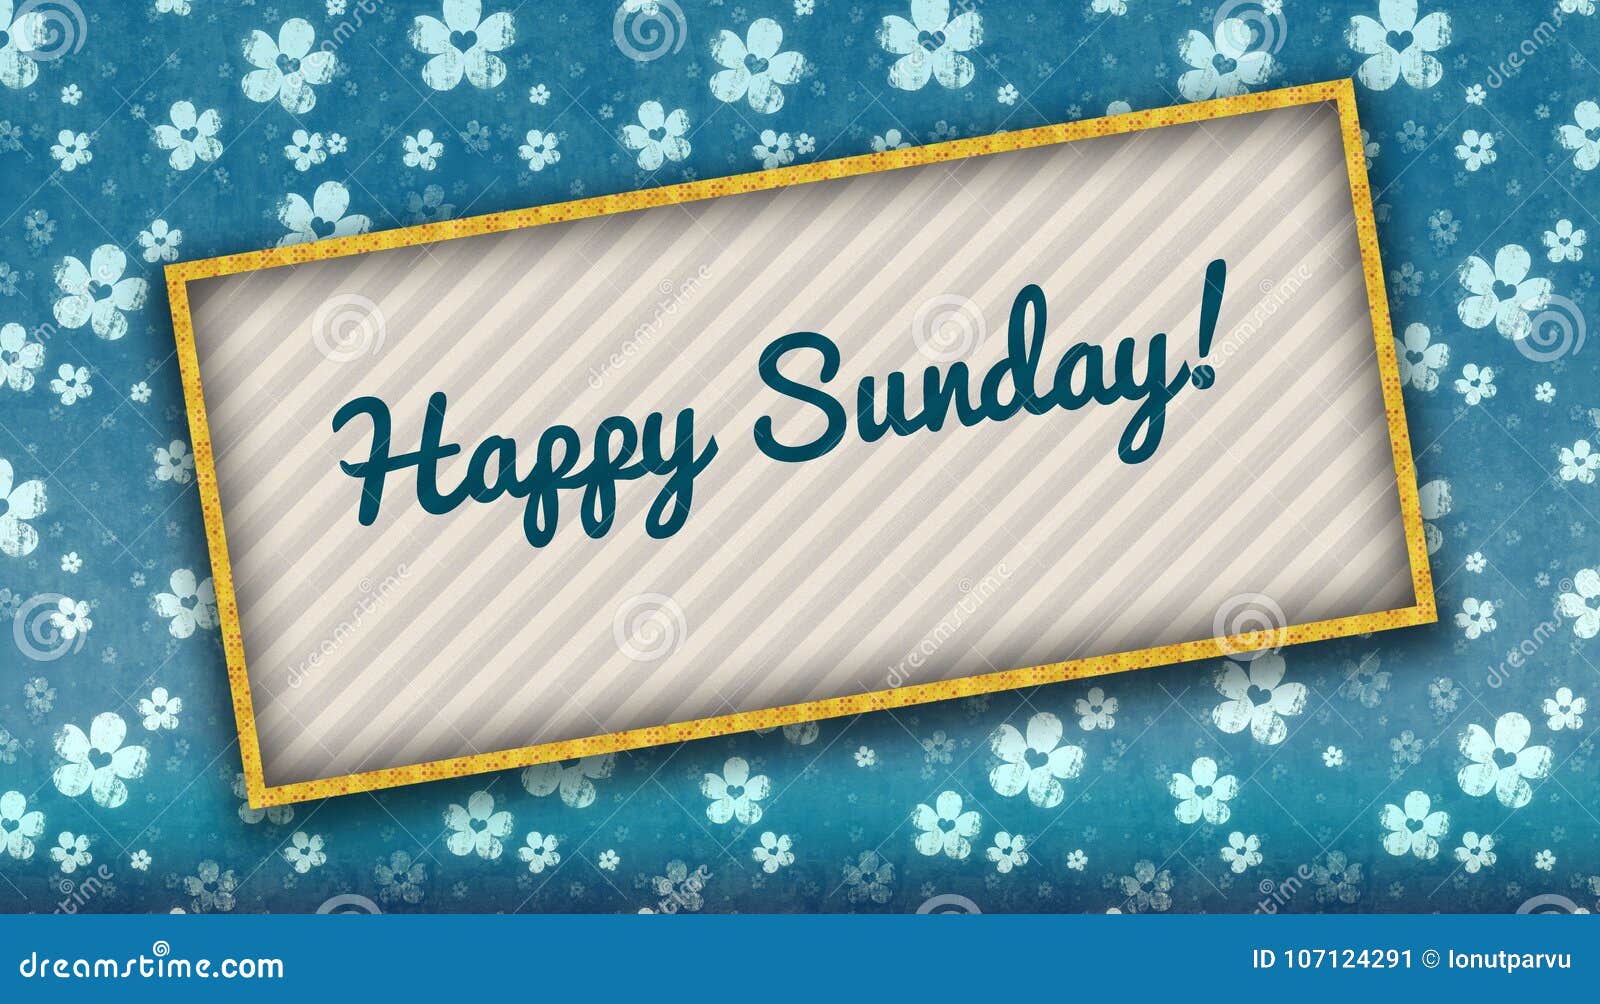 Painting with HAPPY SUNDAY Message on Blue Wallpaper with Flow ...